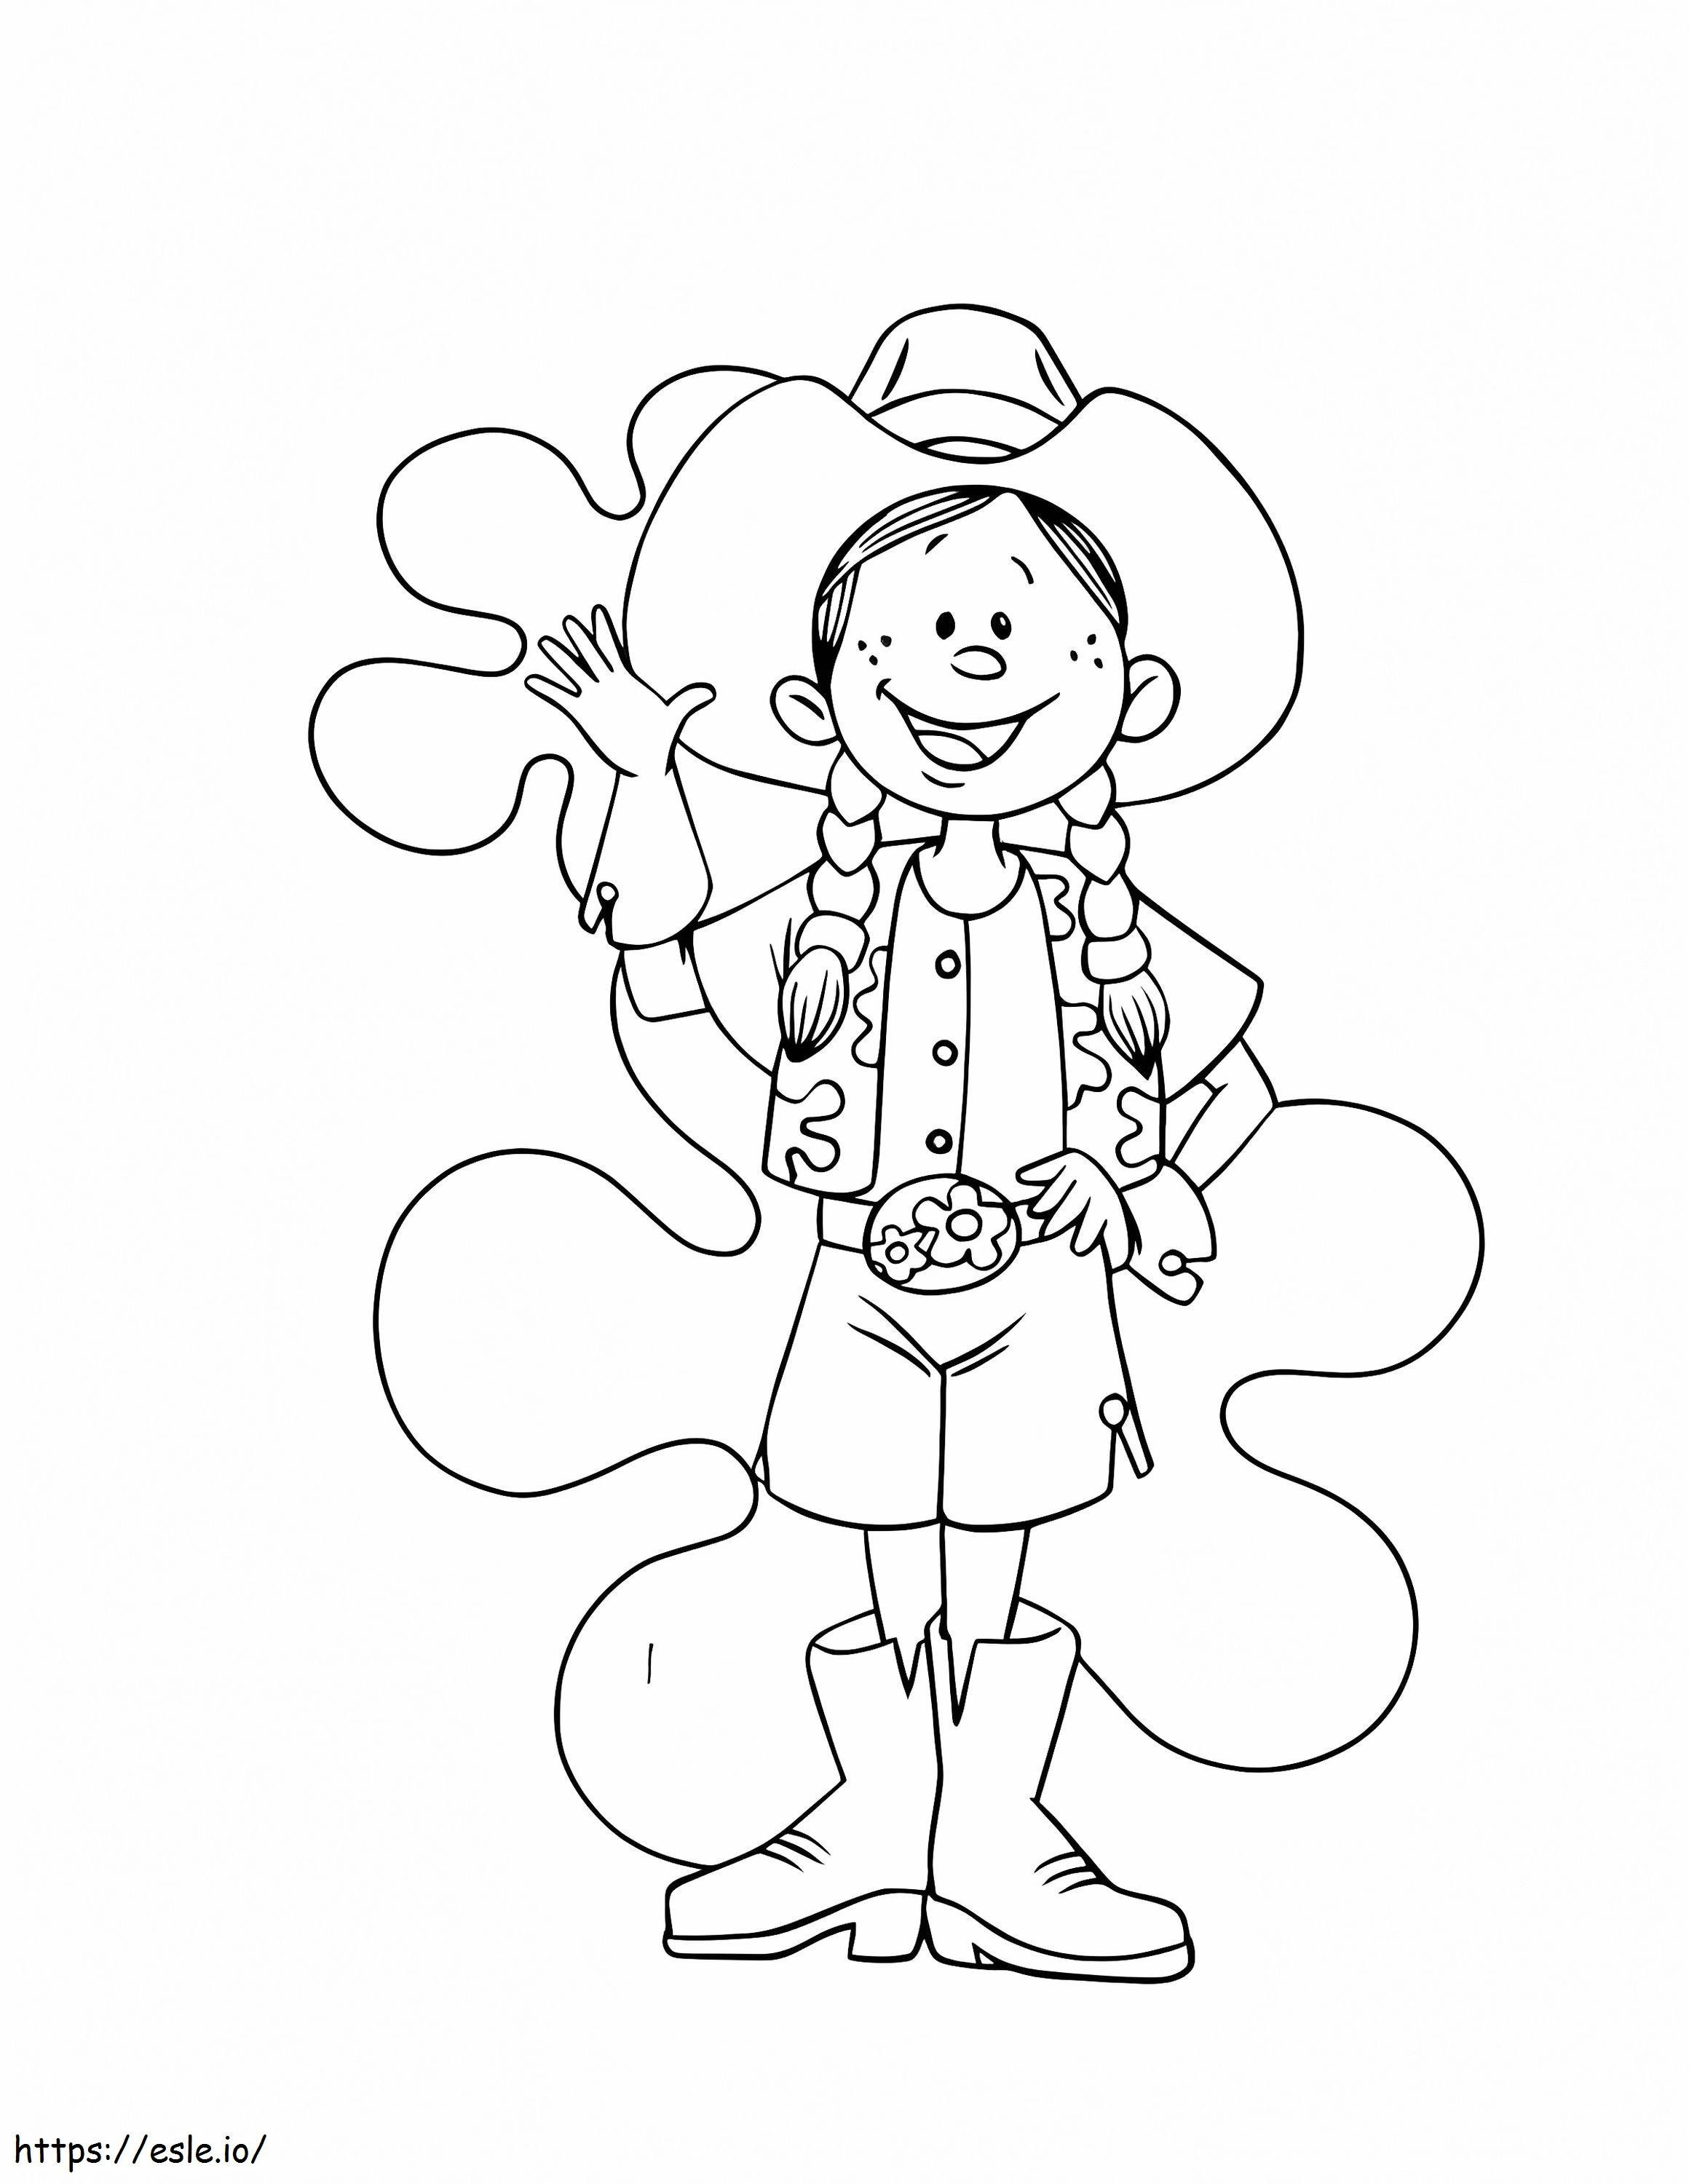 Funny Cowgirl coloring page